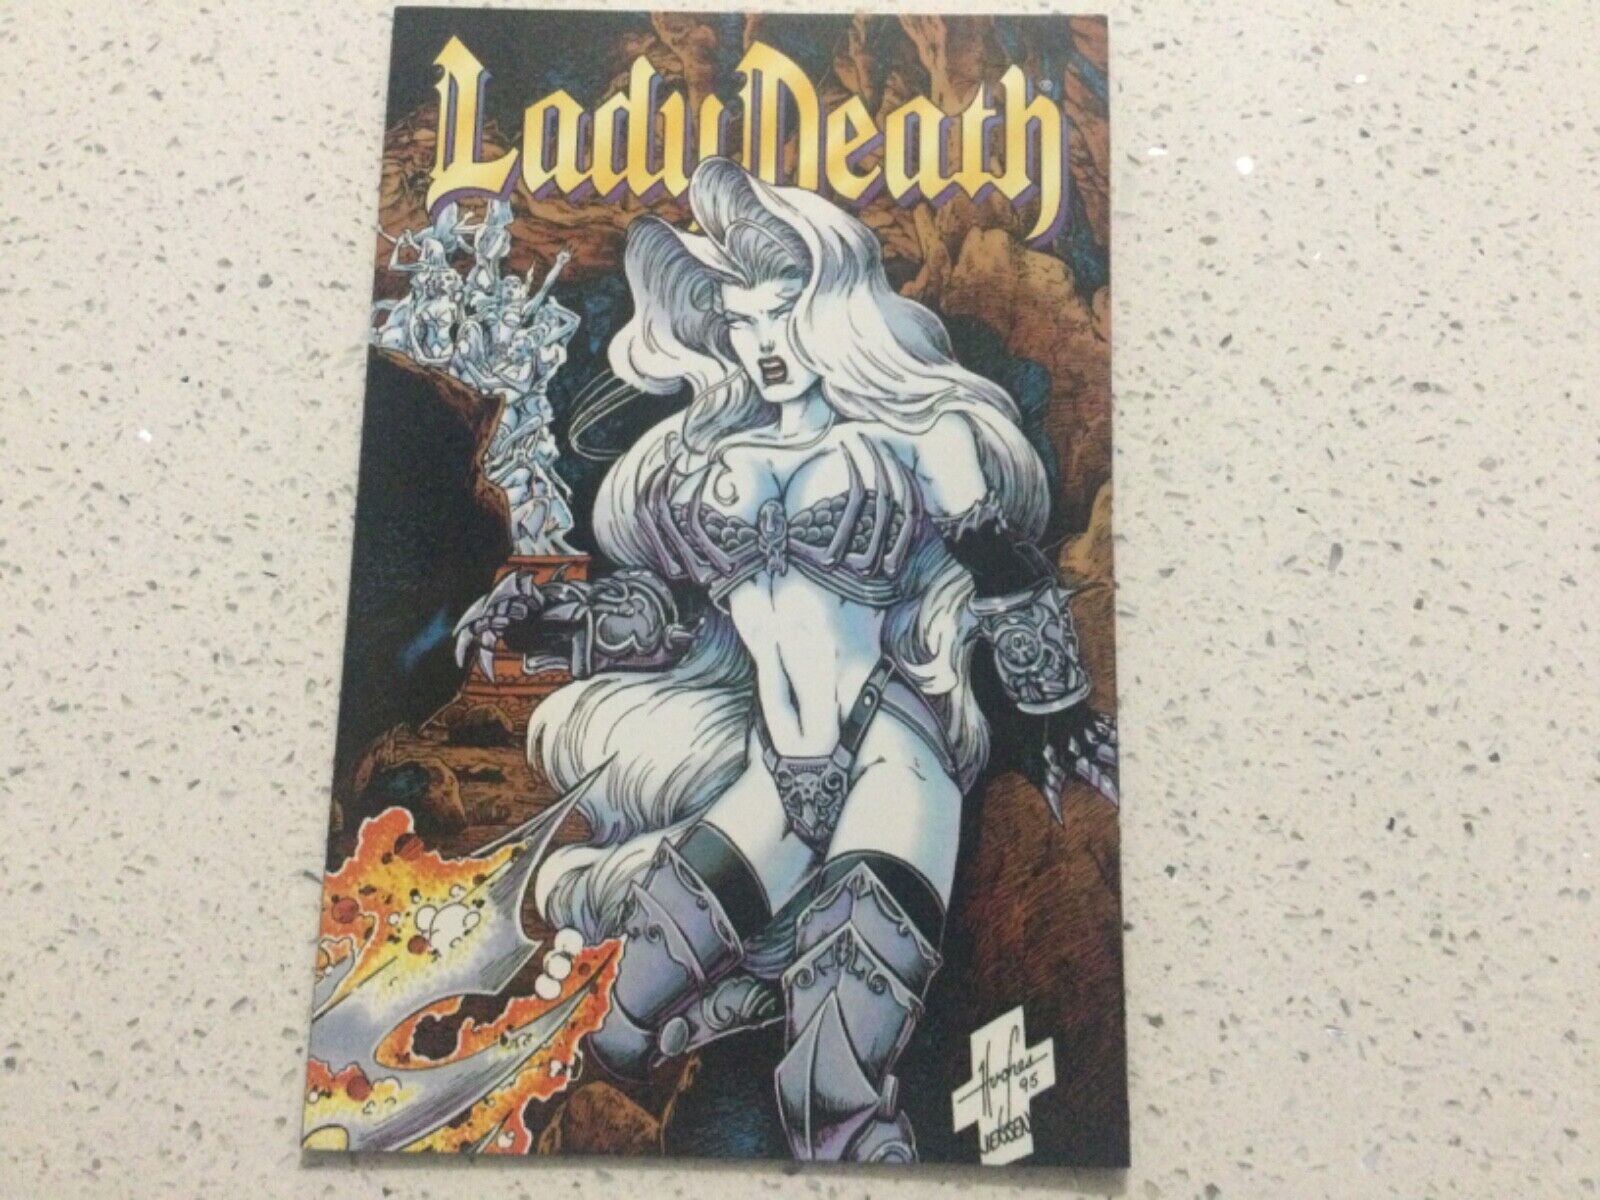 1996 LADY DEATH THE ODYSSEY #2 first printing New vintage